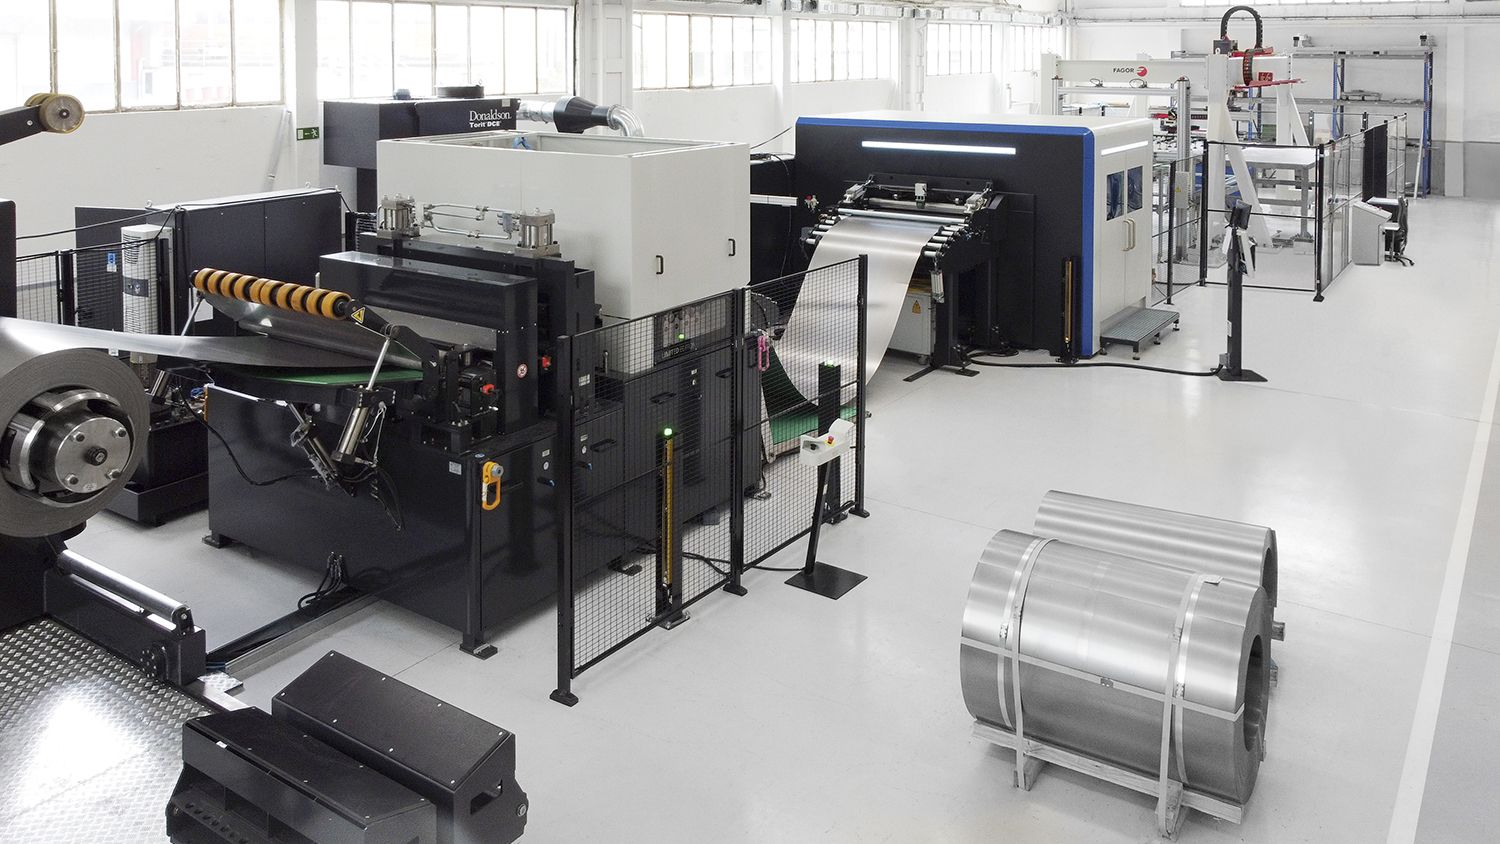 Danobatgroup and Fagor Arrasate develop a sheet metal cutting line with laser blanking technology